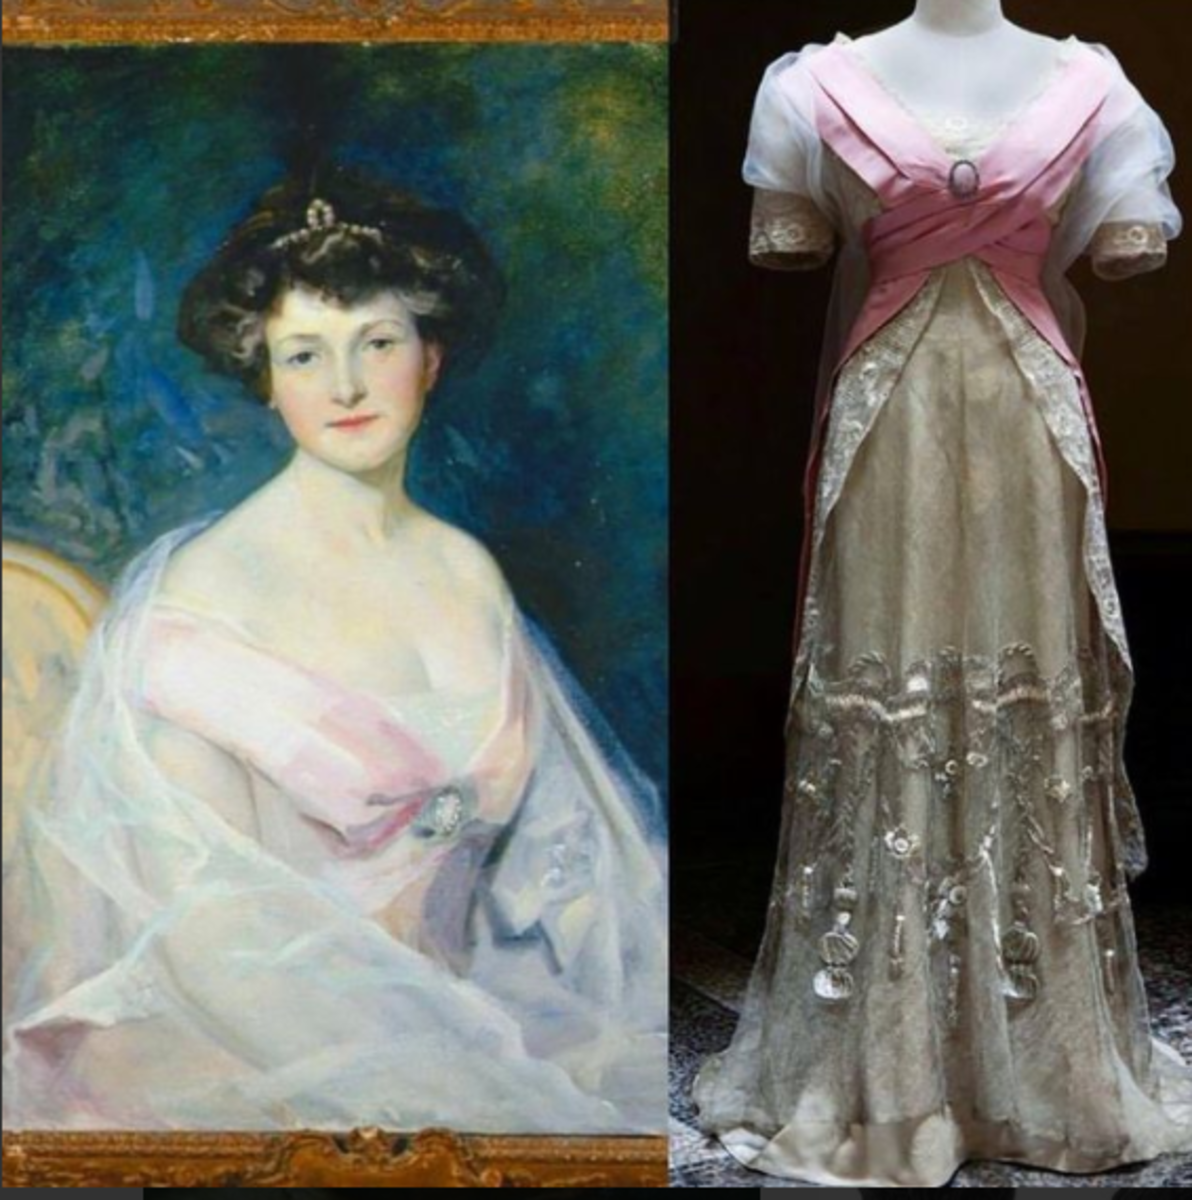 A pink and cream silk evening ballgown with embroidered metallic net overlay and train, circa 1907, and a portrait by Julius Rolshoven of American heiress Hortense Mitchell Acton wearing the dress.